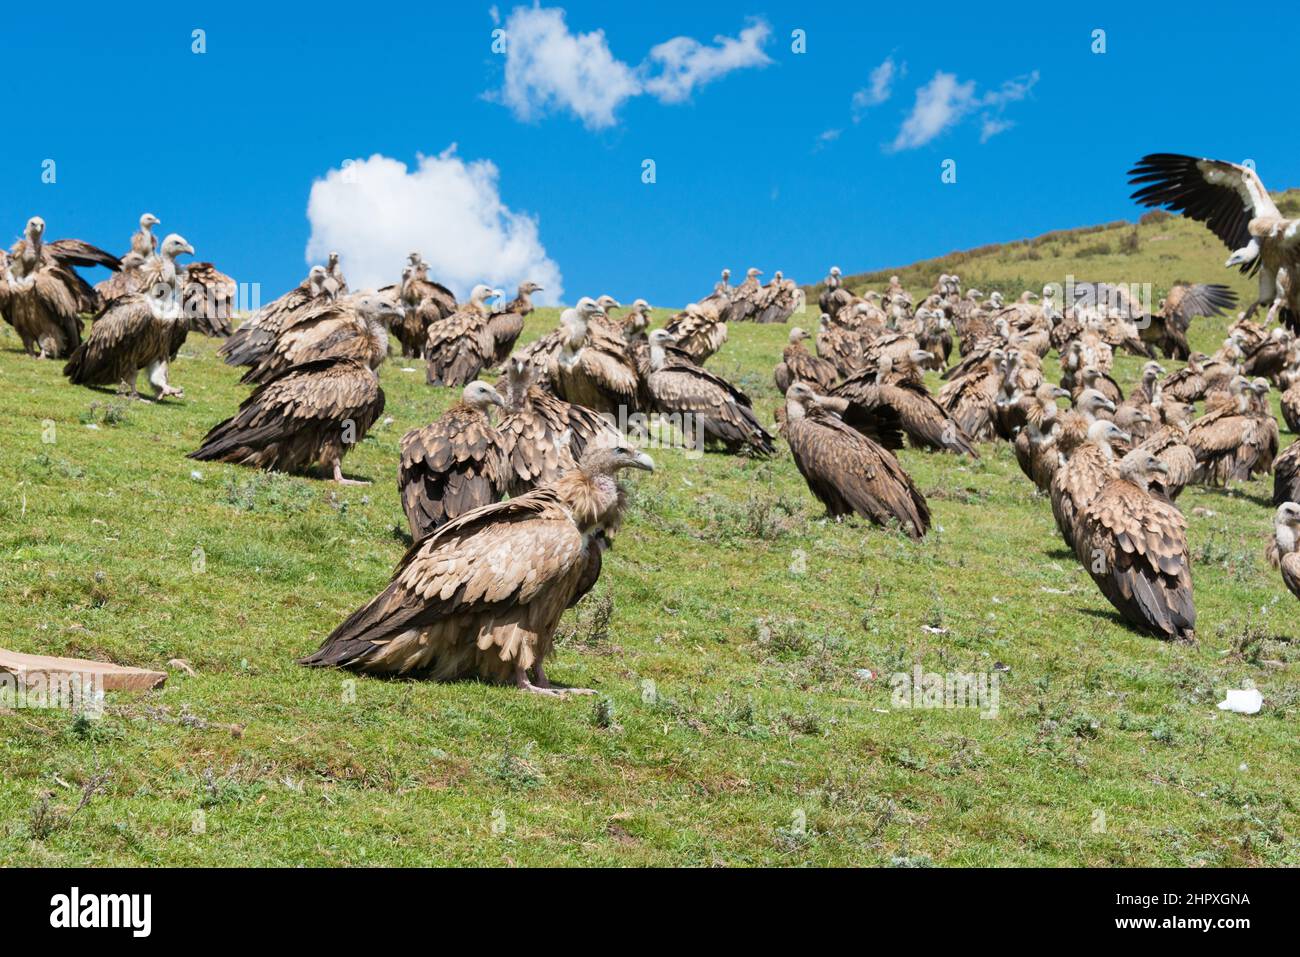 SICHUAN, CHINA - Vulture at Sky burial site in Larung Gar. a famous Lamasery in Seda, Sichuan, China. Stock Photo